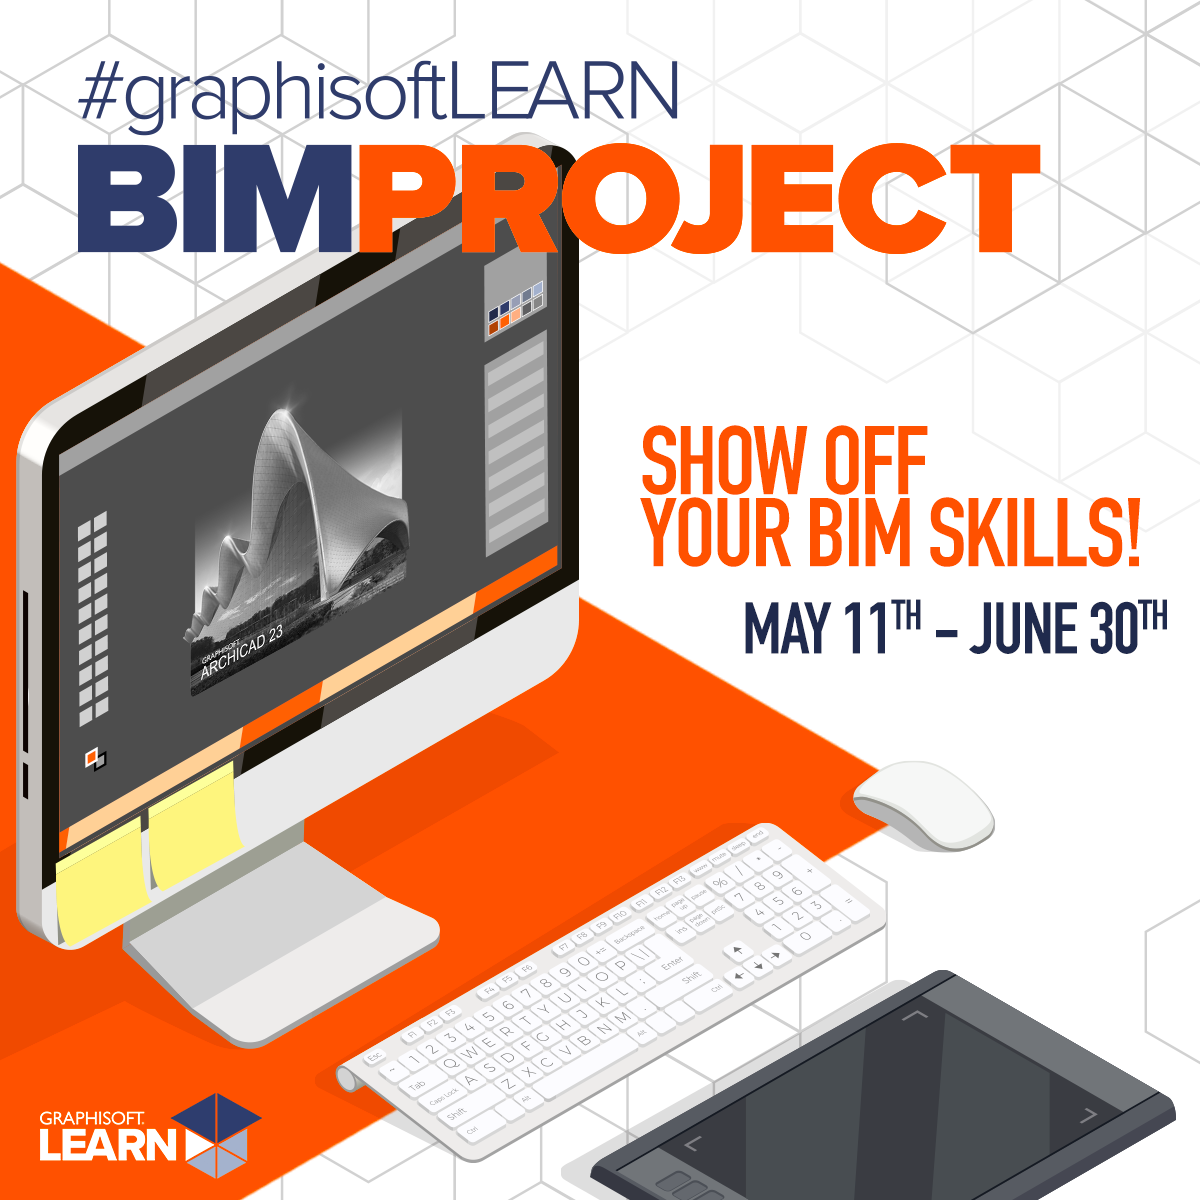 Enter the #graphisoftLEARN BIMproject Contest Today!